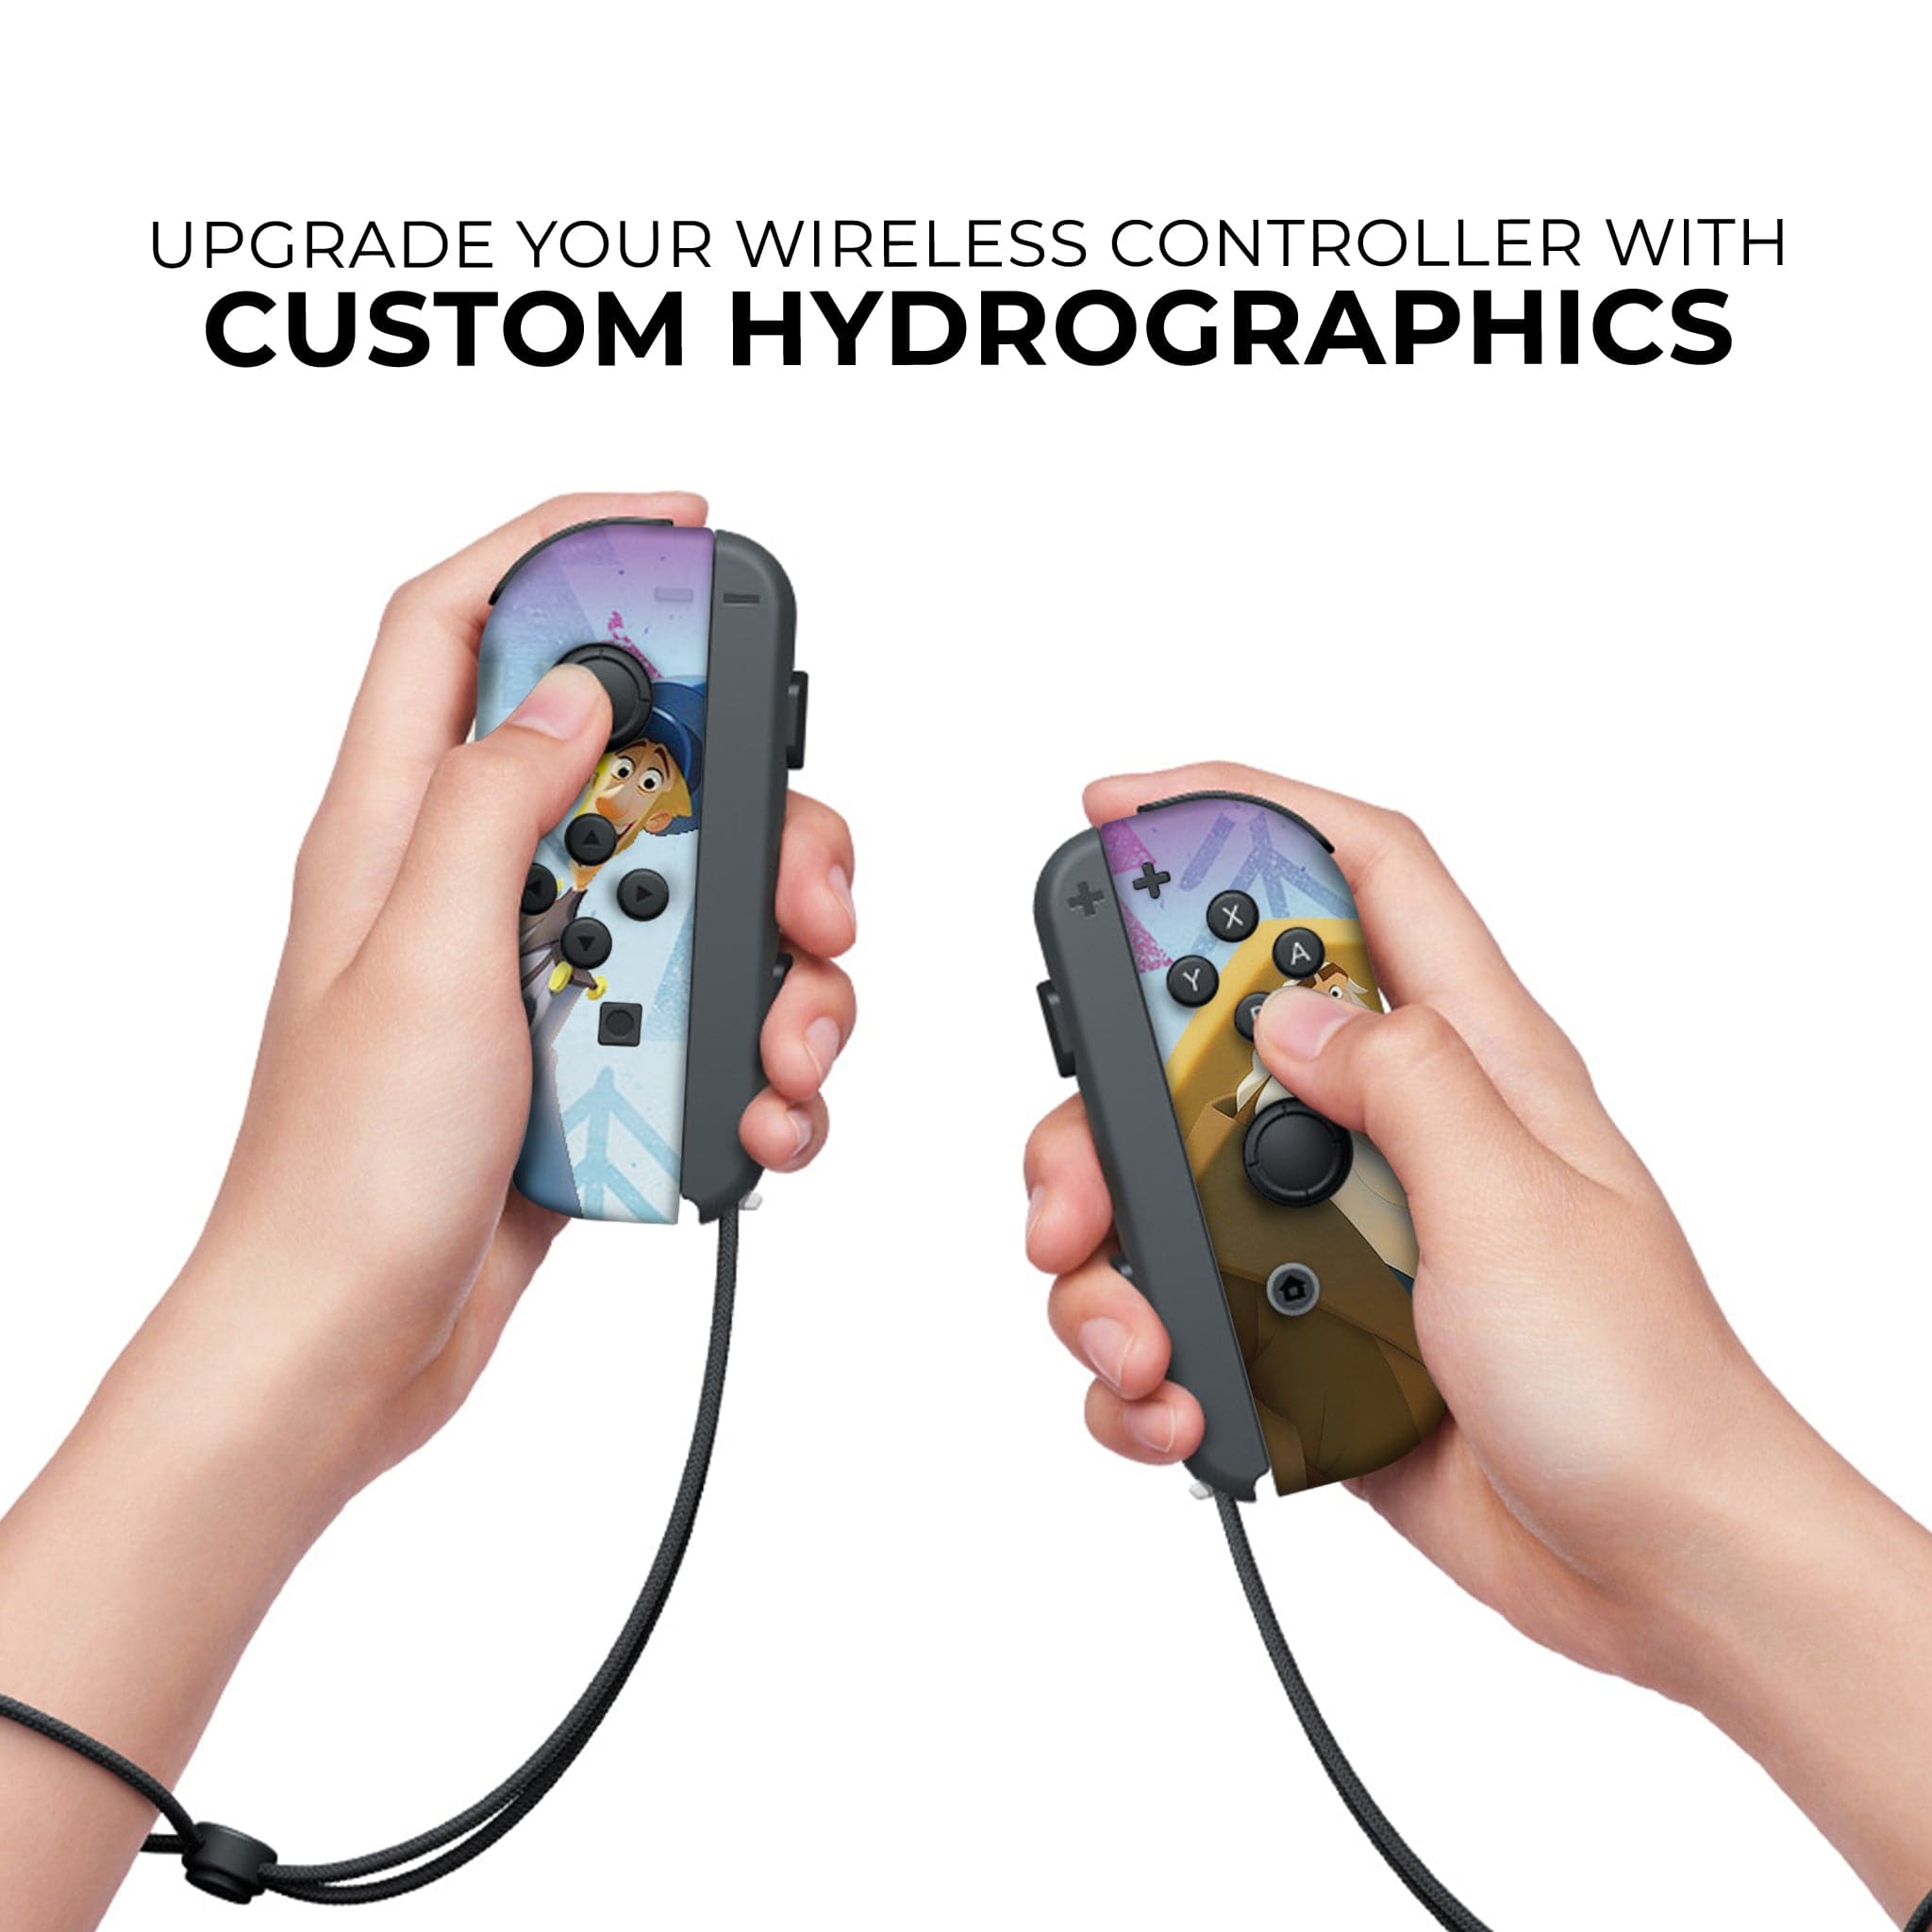 Klaus Joy-Con Left and Right Nintendo Switch Controllers